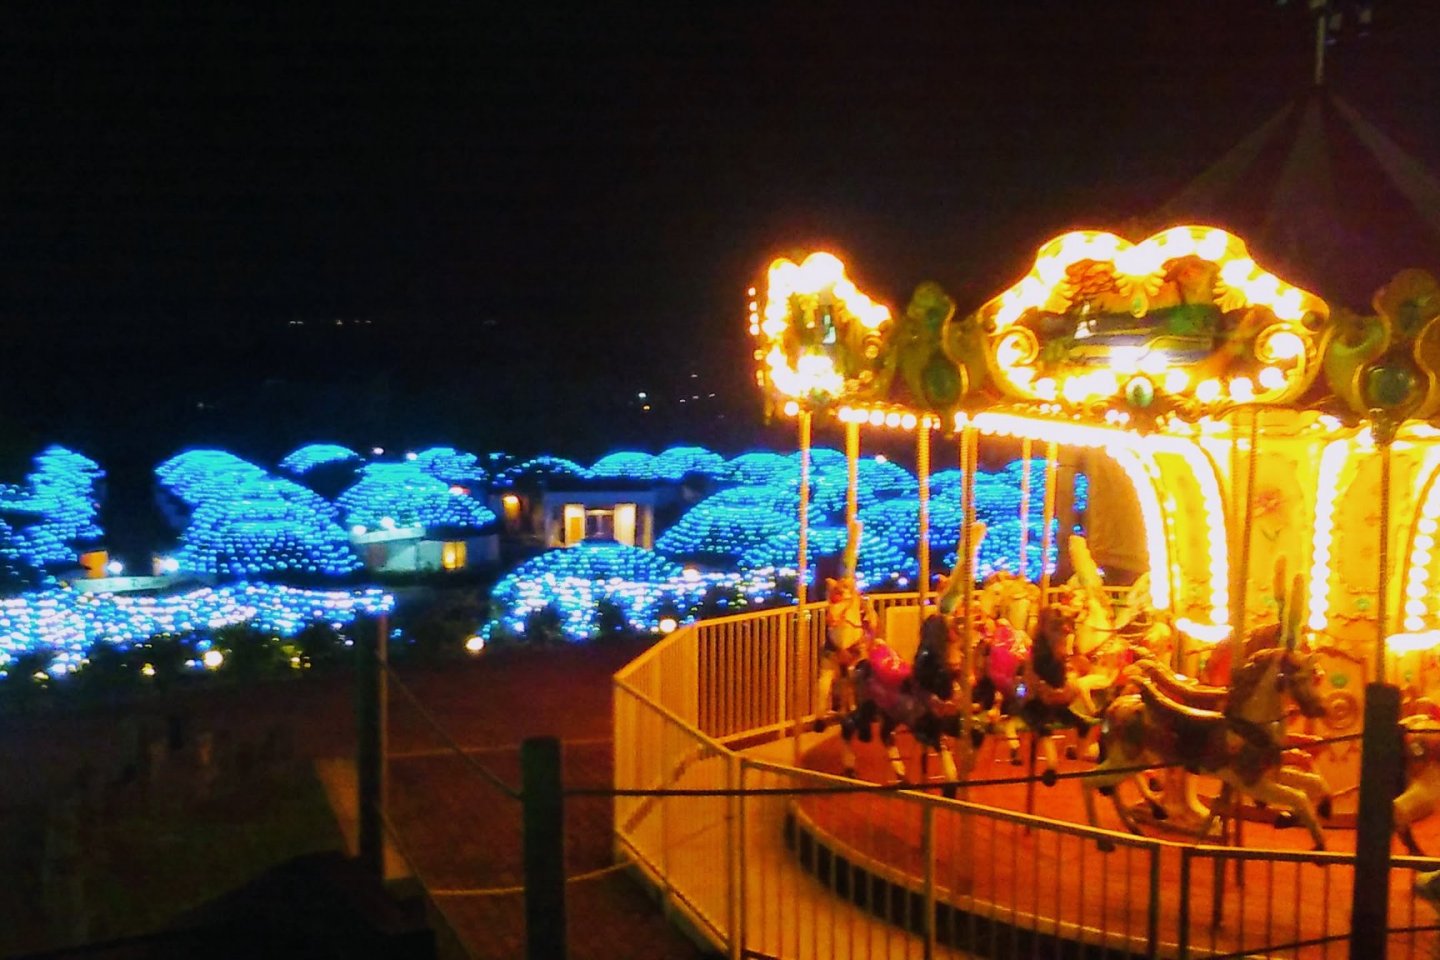 Carousel and yurts lit up at night